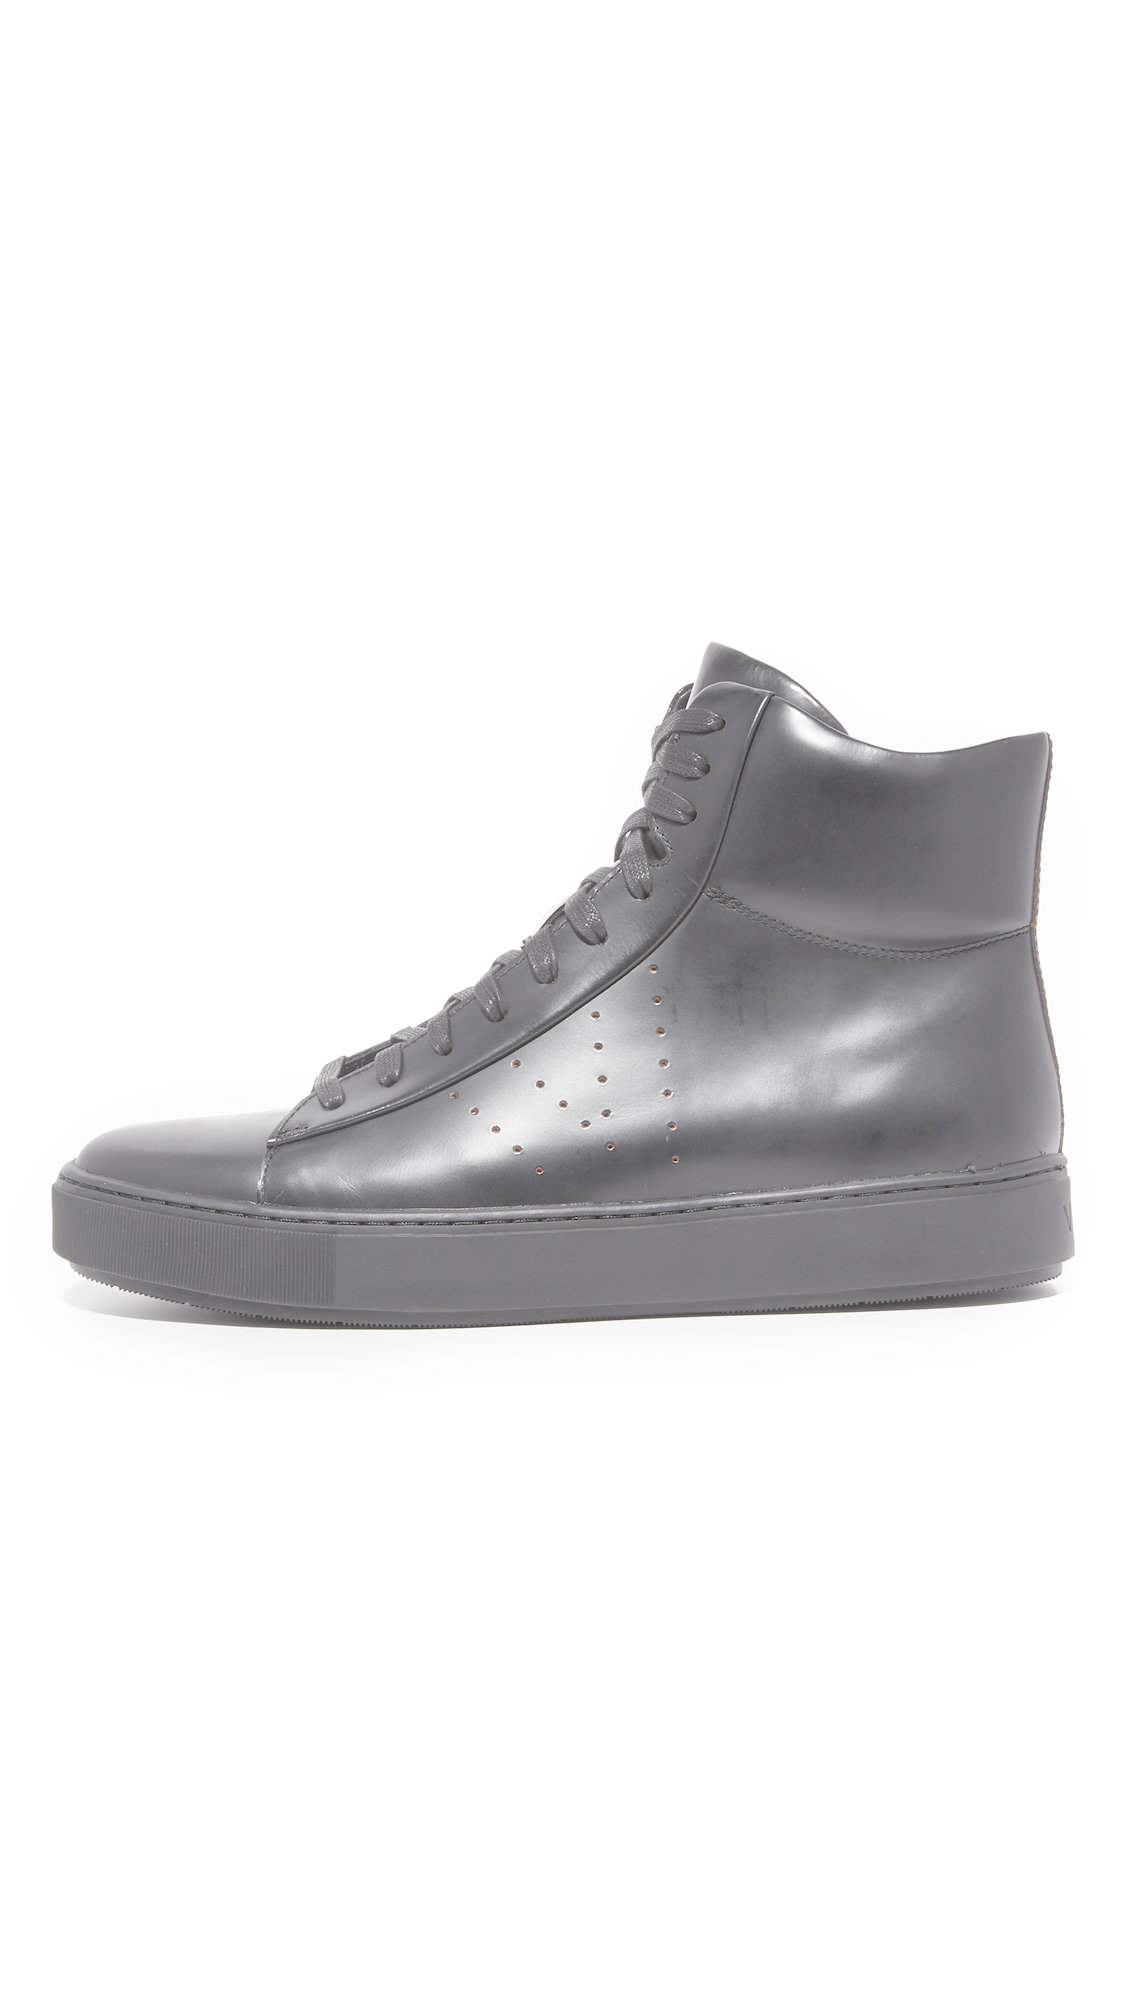 Lyst - Vince Liam High Top Sneakers in Black for Men